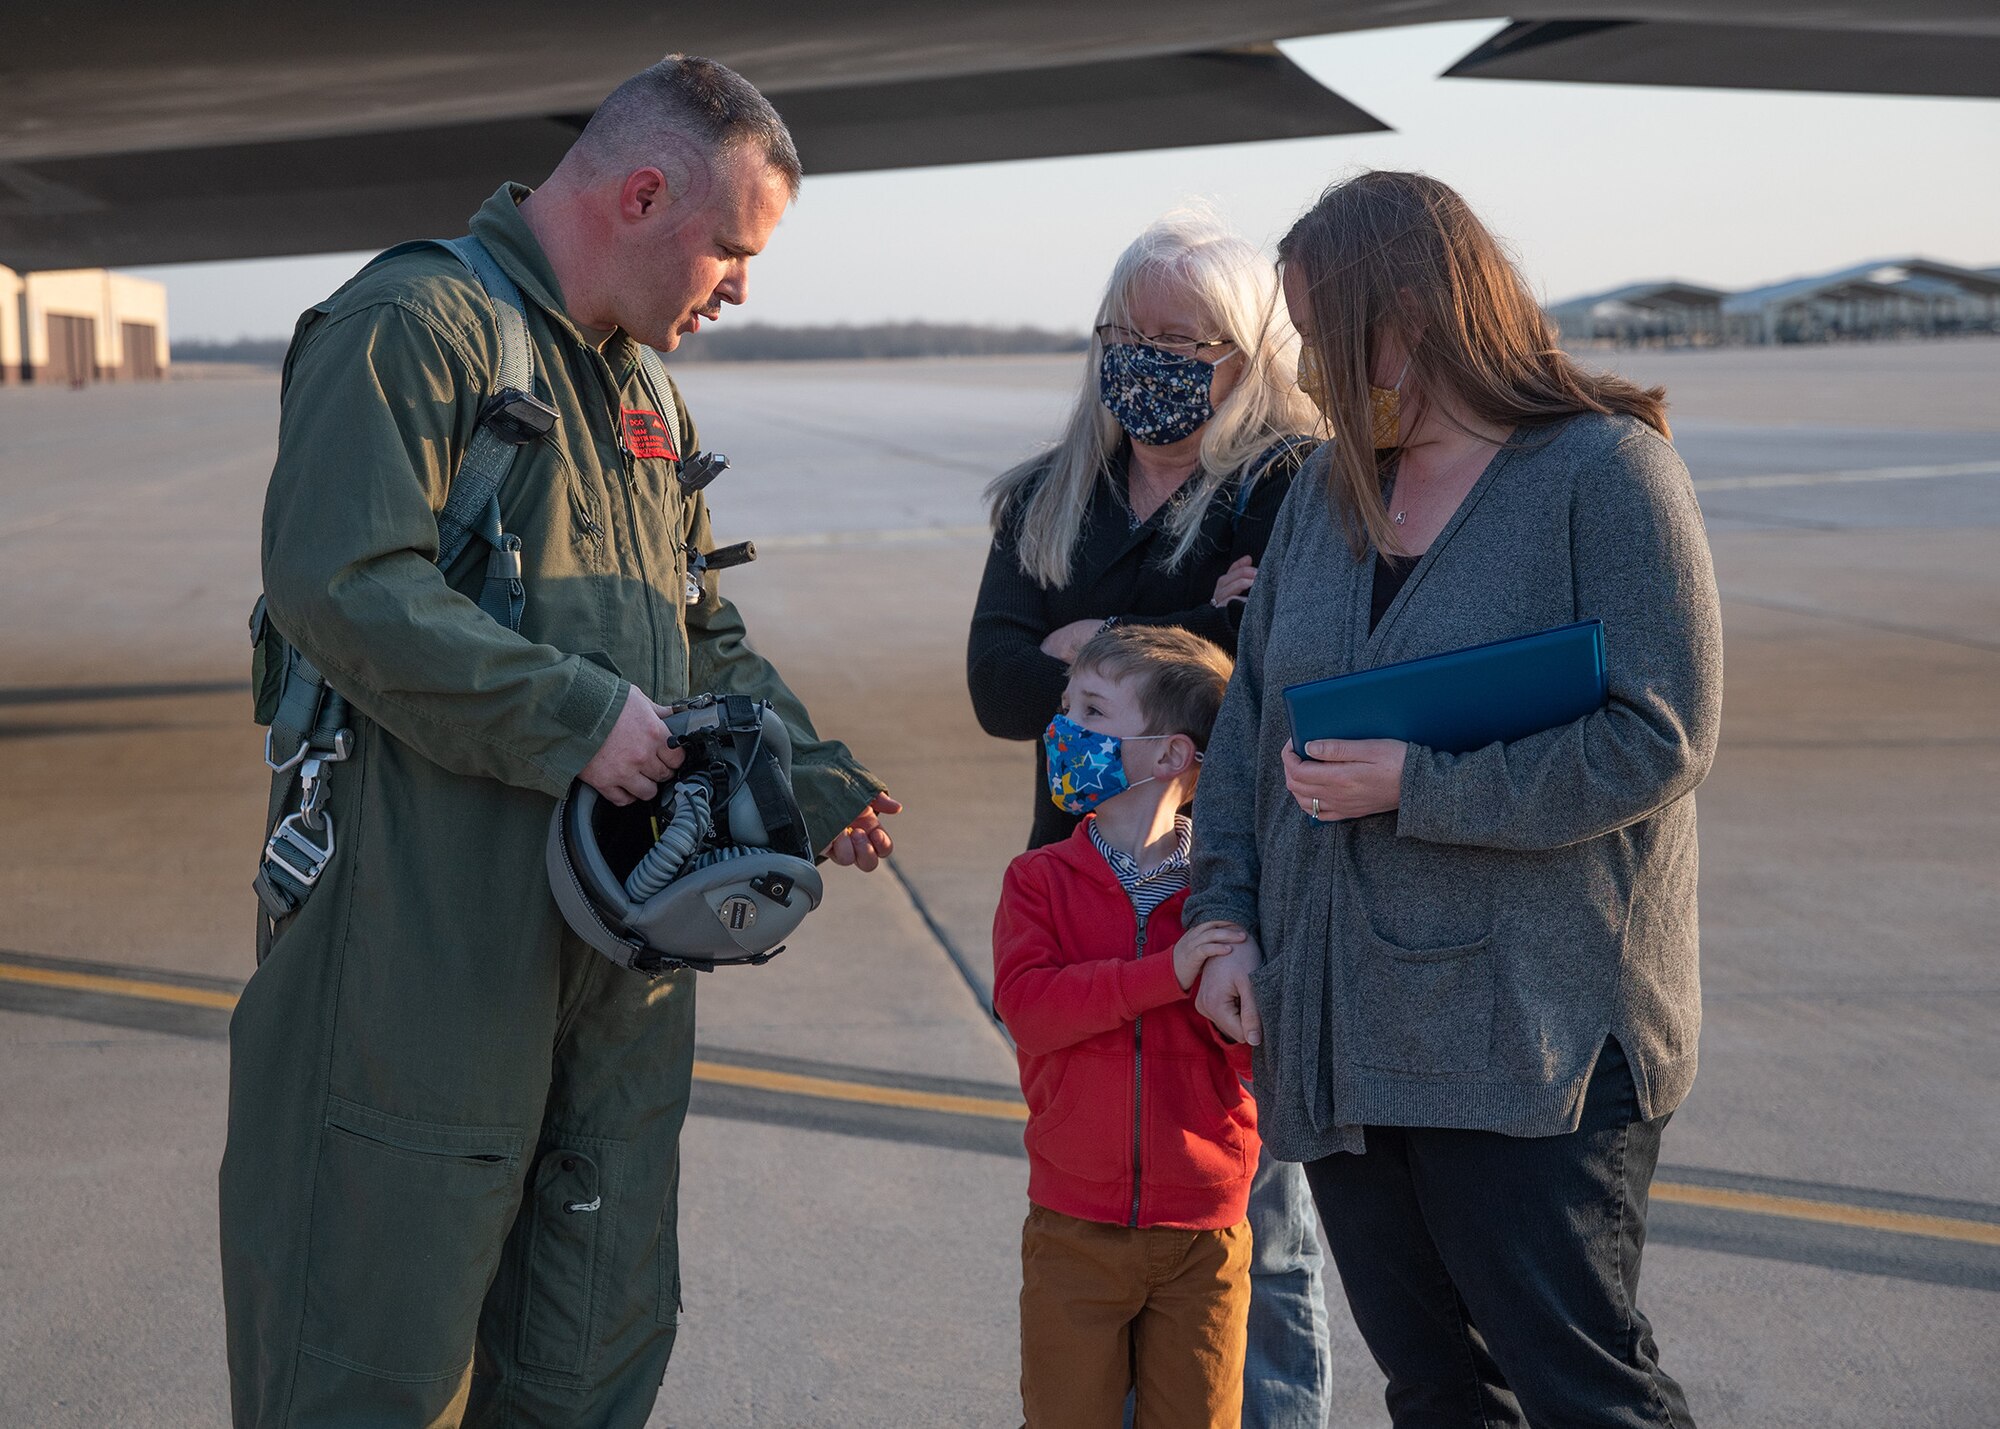 A U.S. Air Force Airman wearing a flight gear speaks with family members on the tarmac at Whiteman Air Force Base, Missouri.